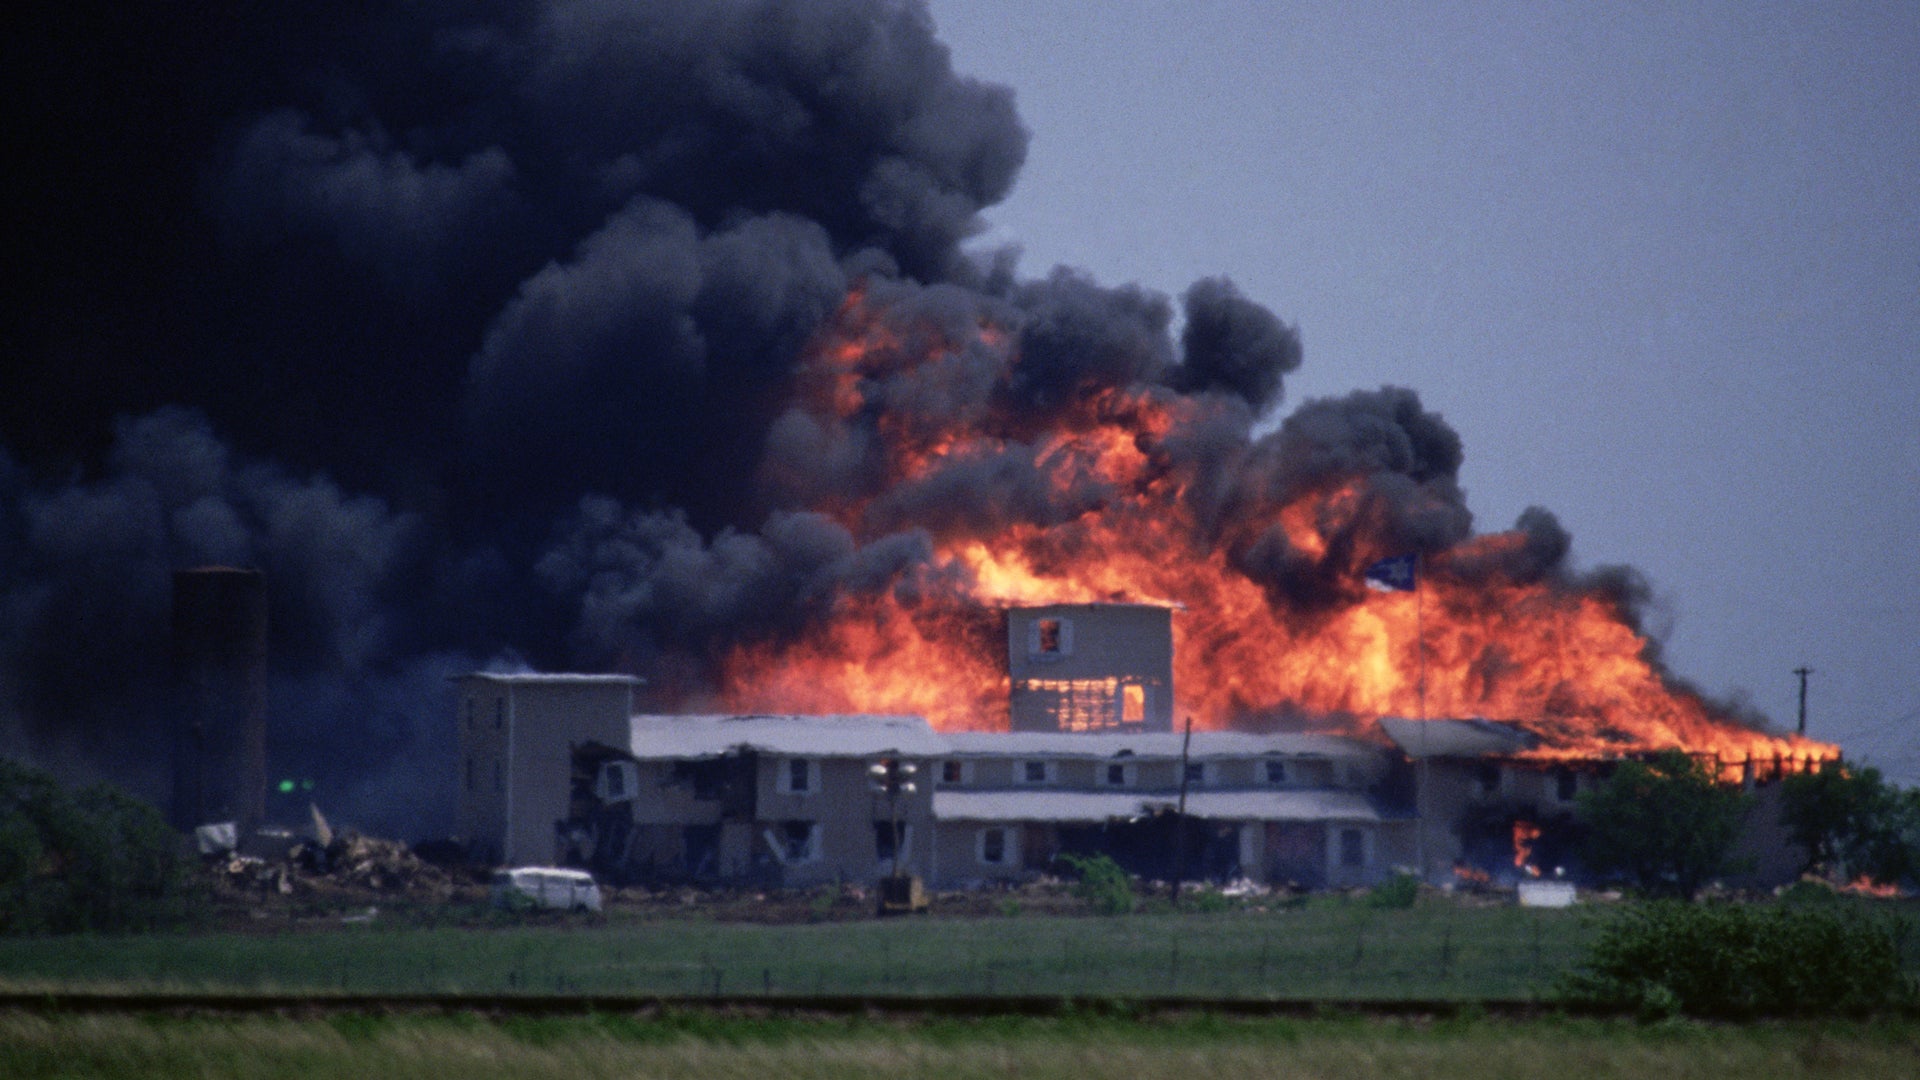 Revealing The Truth Behind The Events Of The Waco Siege